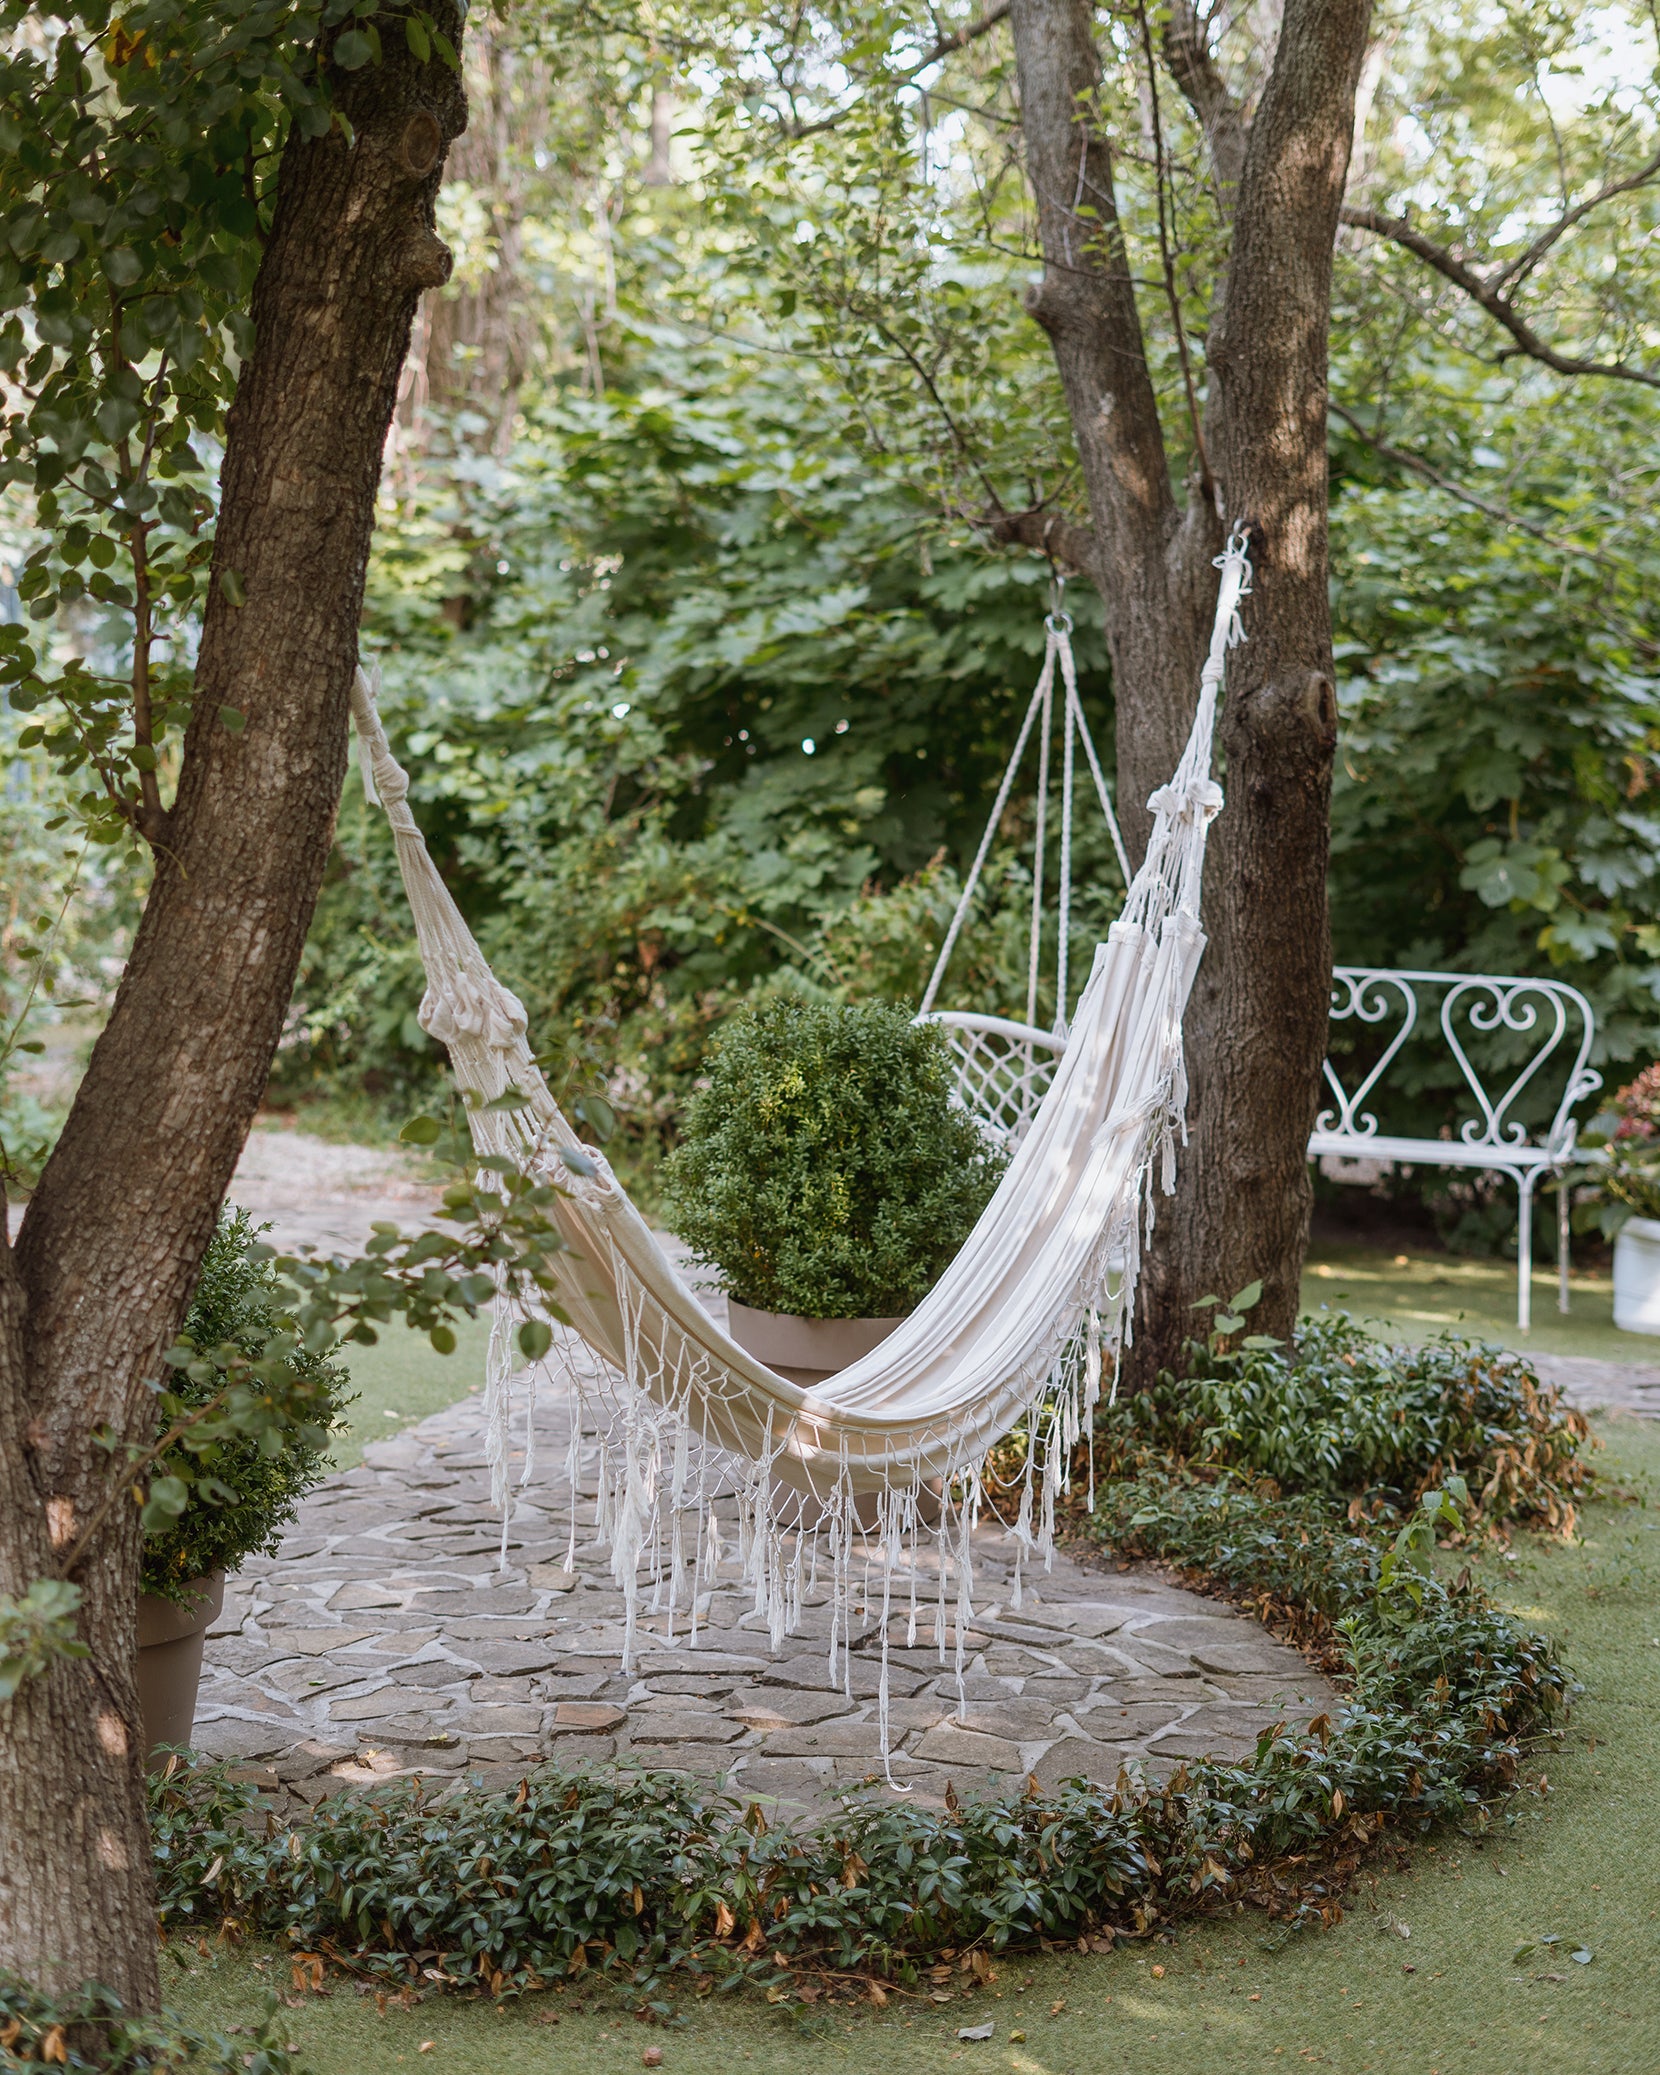 Secluded grass area with a fabric hammock inbetween two trees.